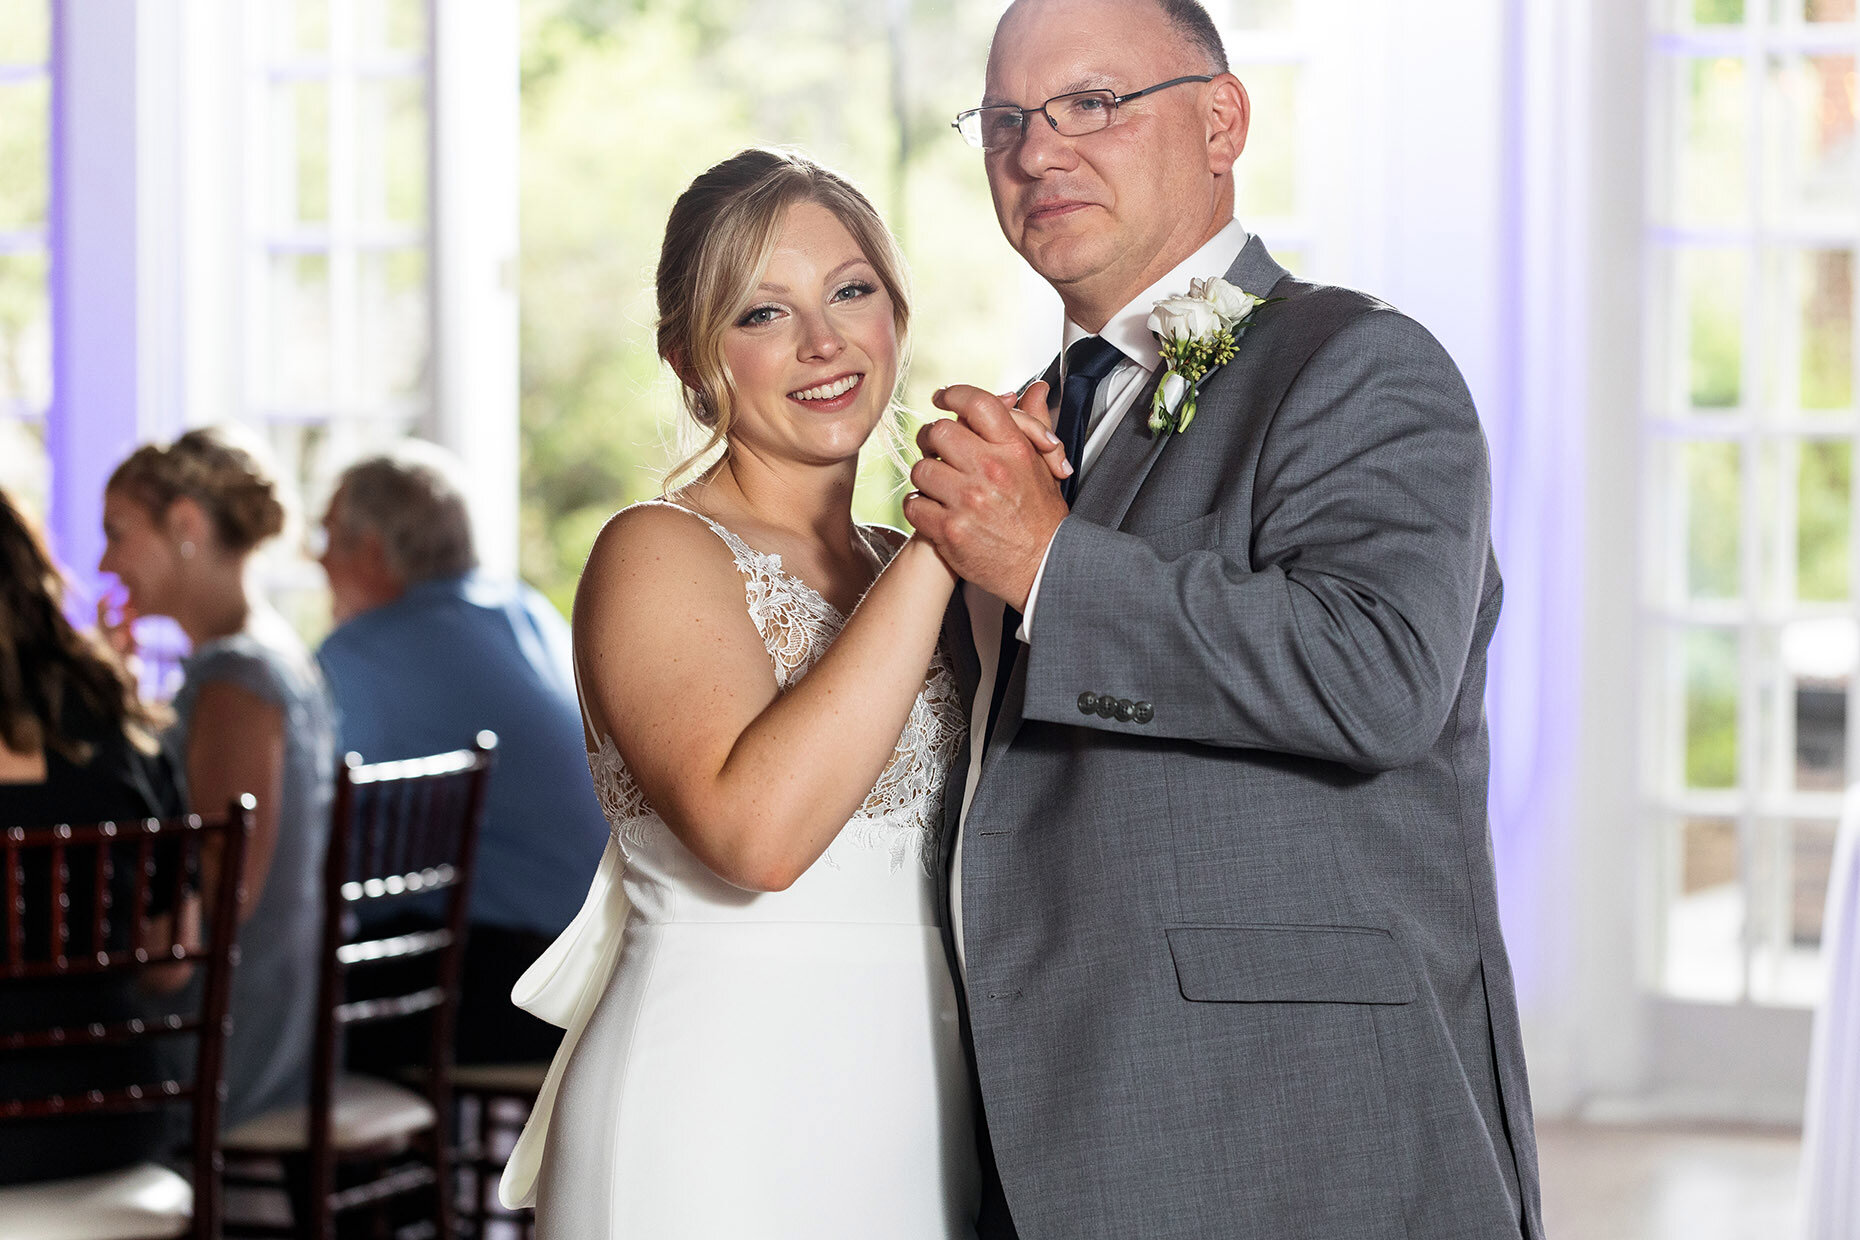 Father Daughter Dance at Lily Manor Wedding Central Mifflin, PA 